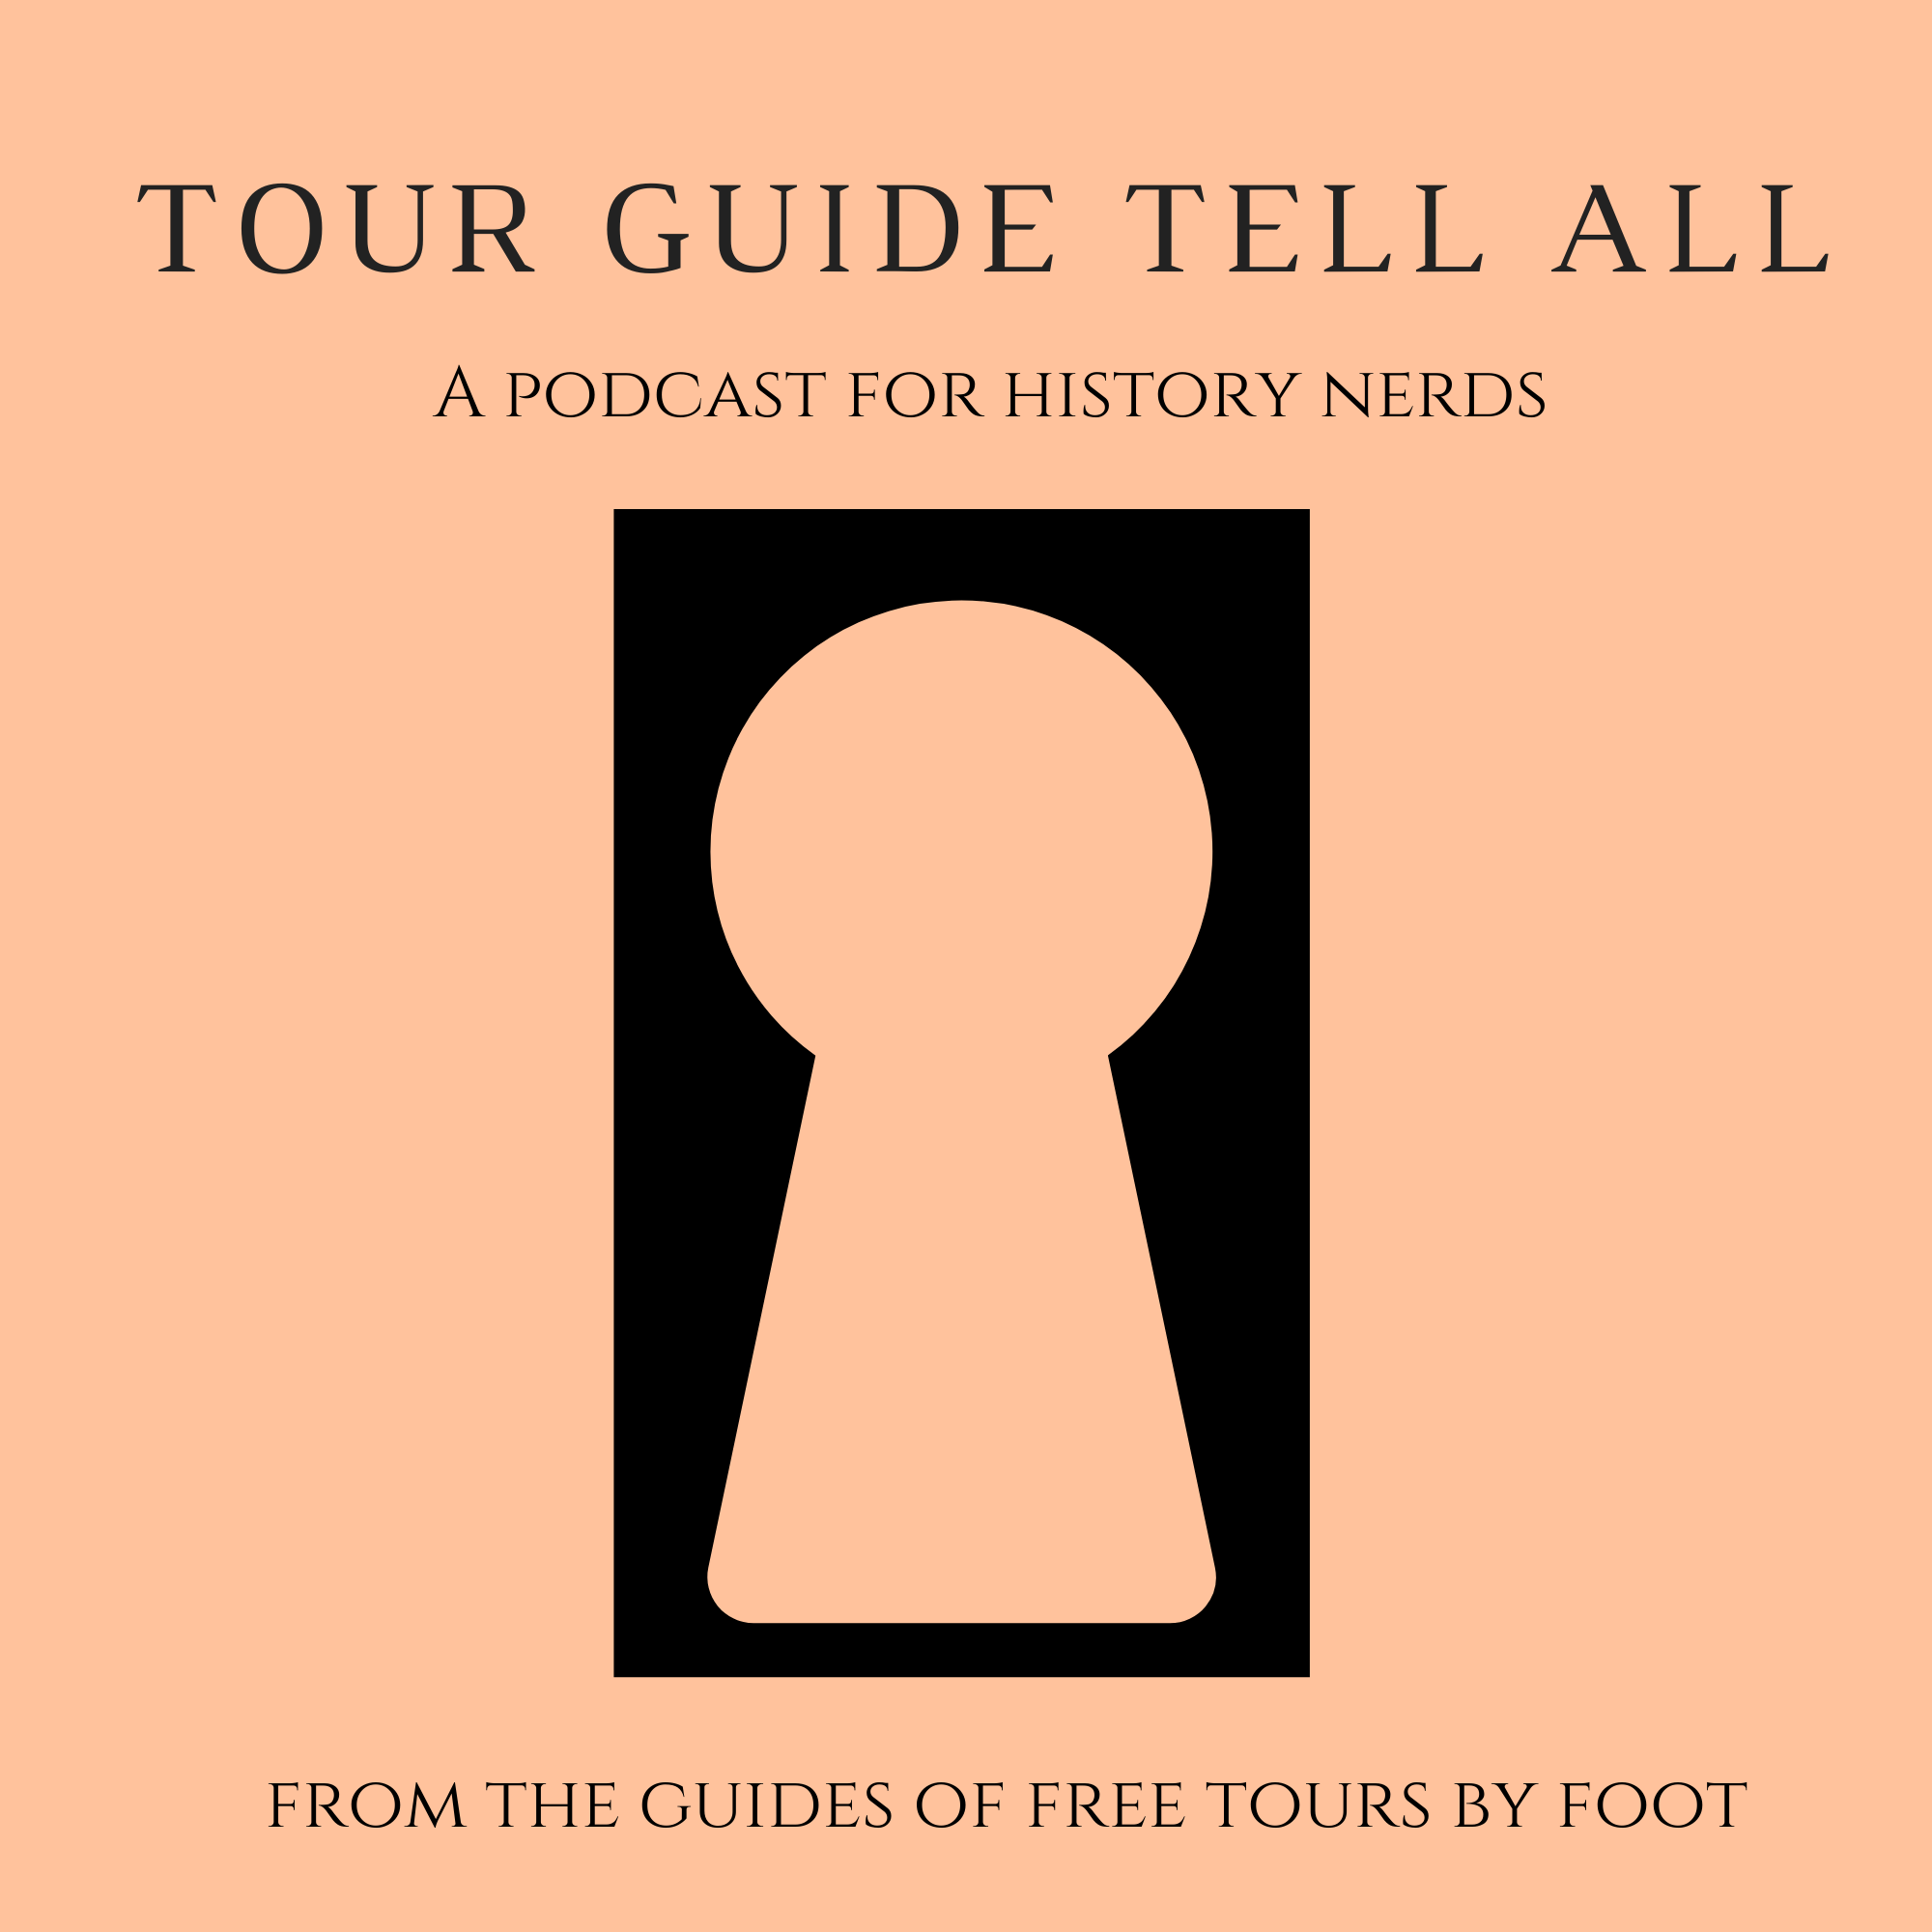 Tour Guide Tell All Podcast